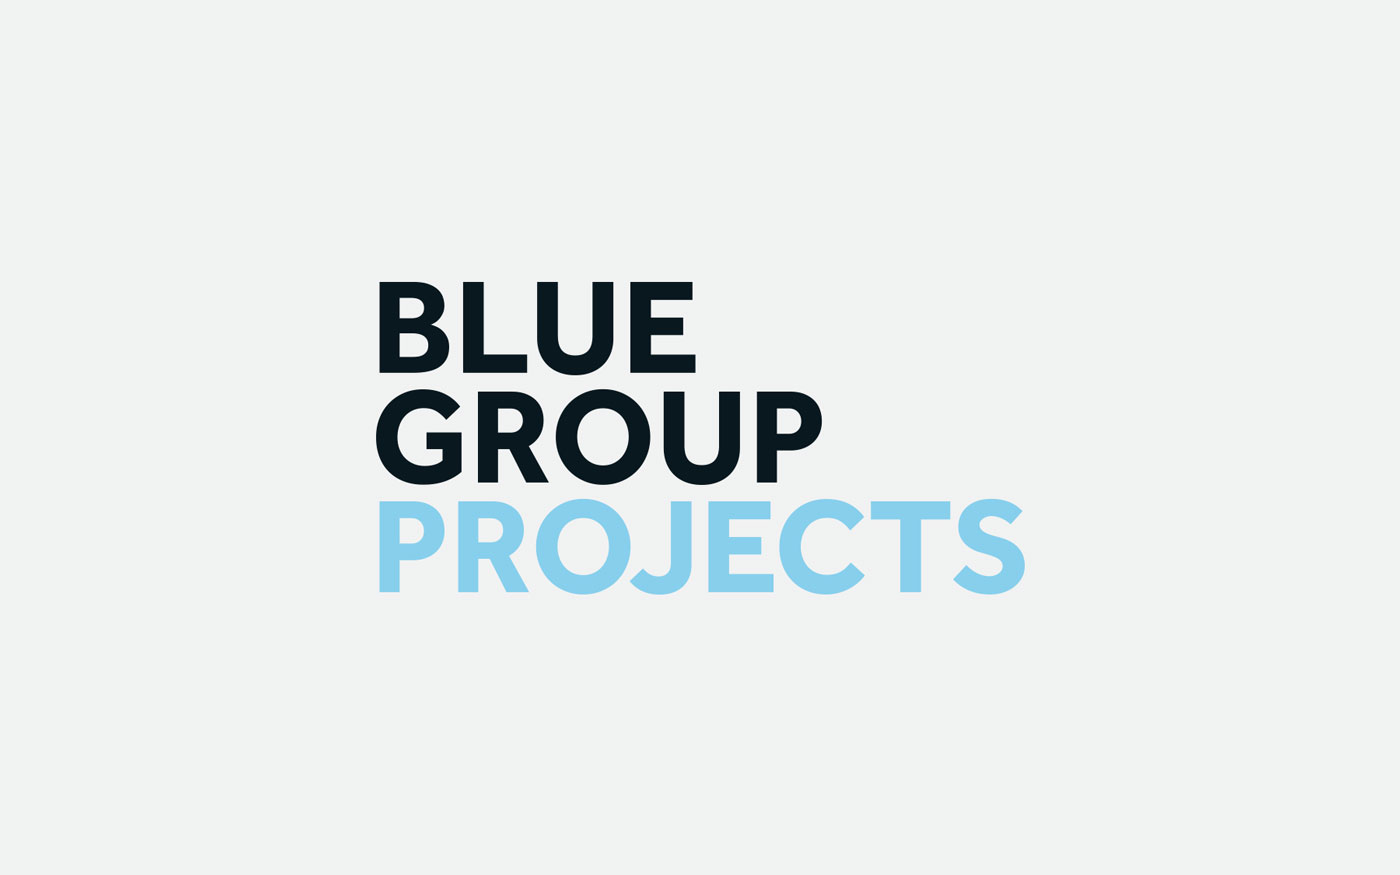 Blue Group Projects